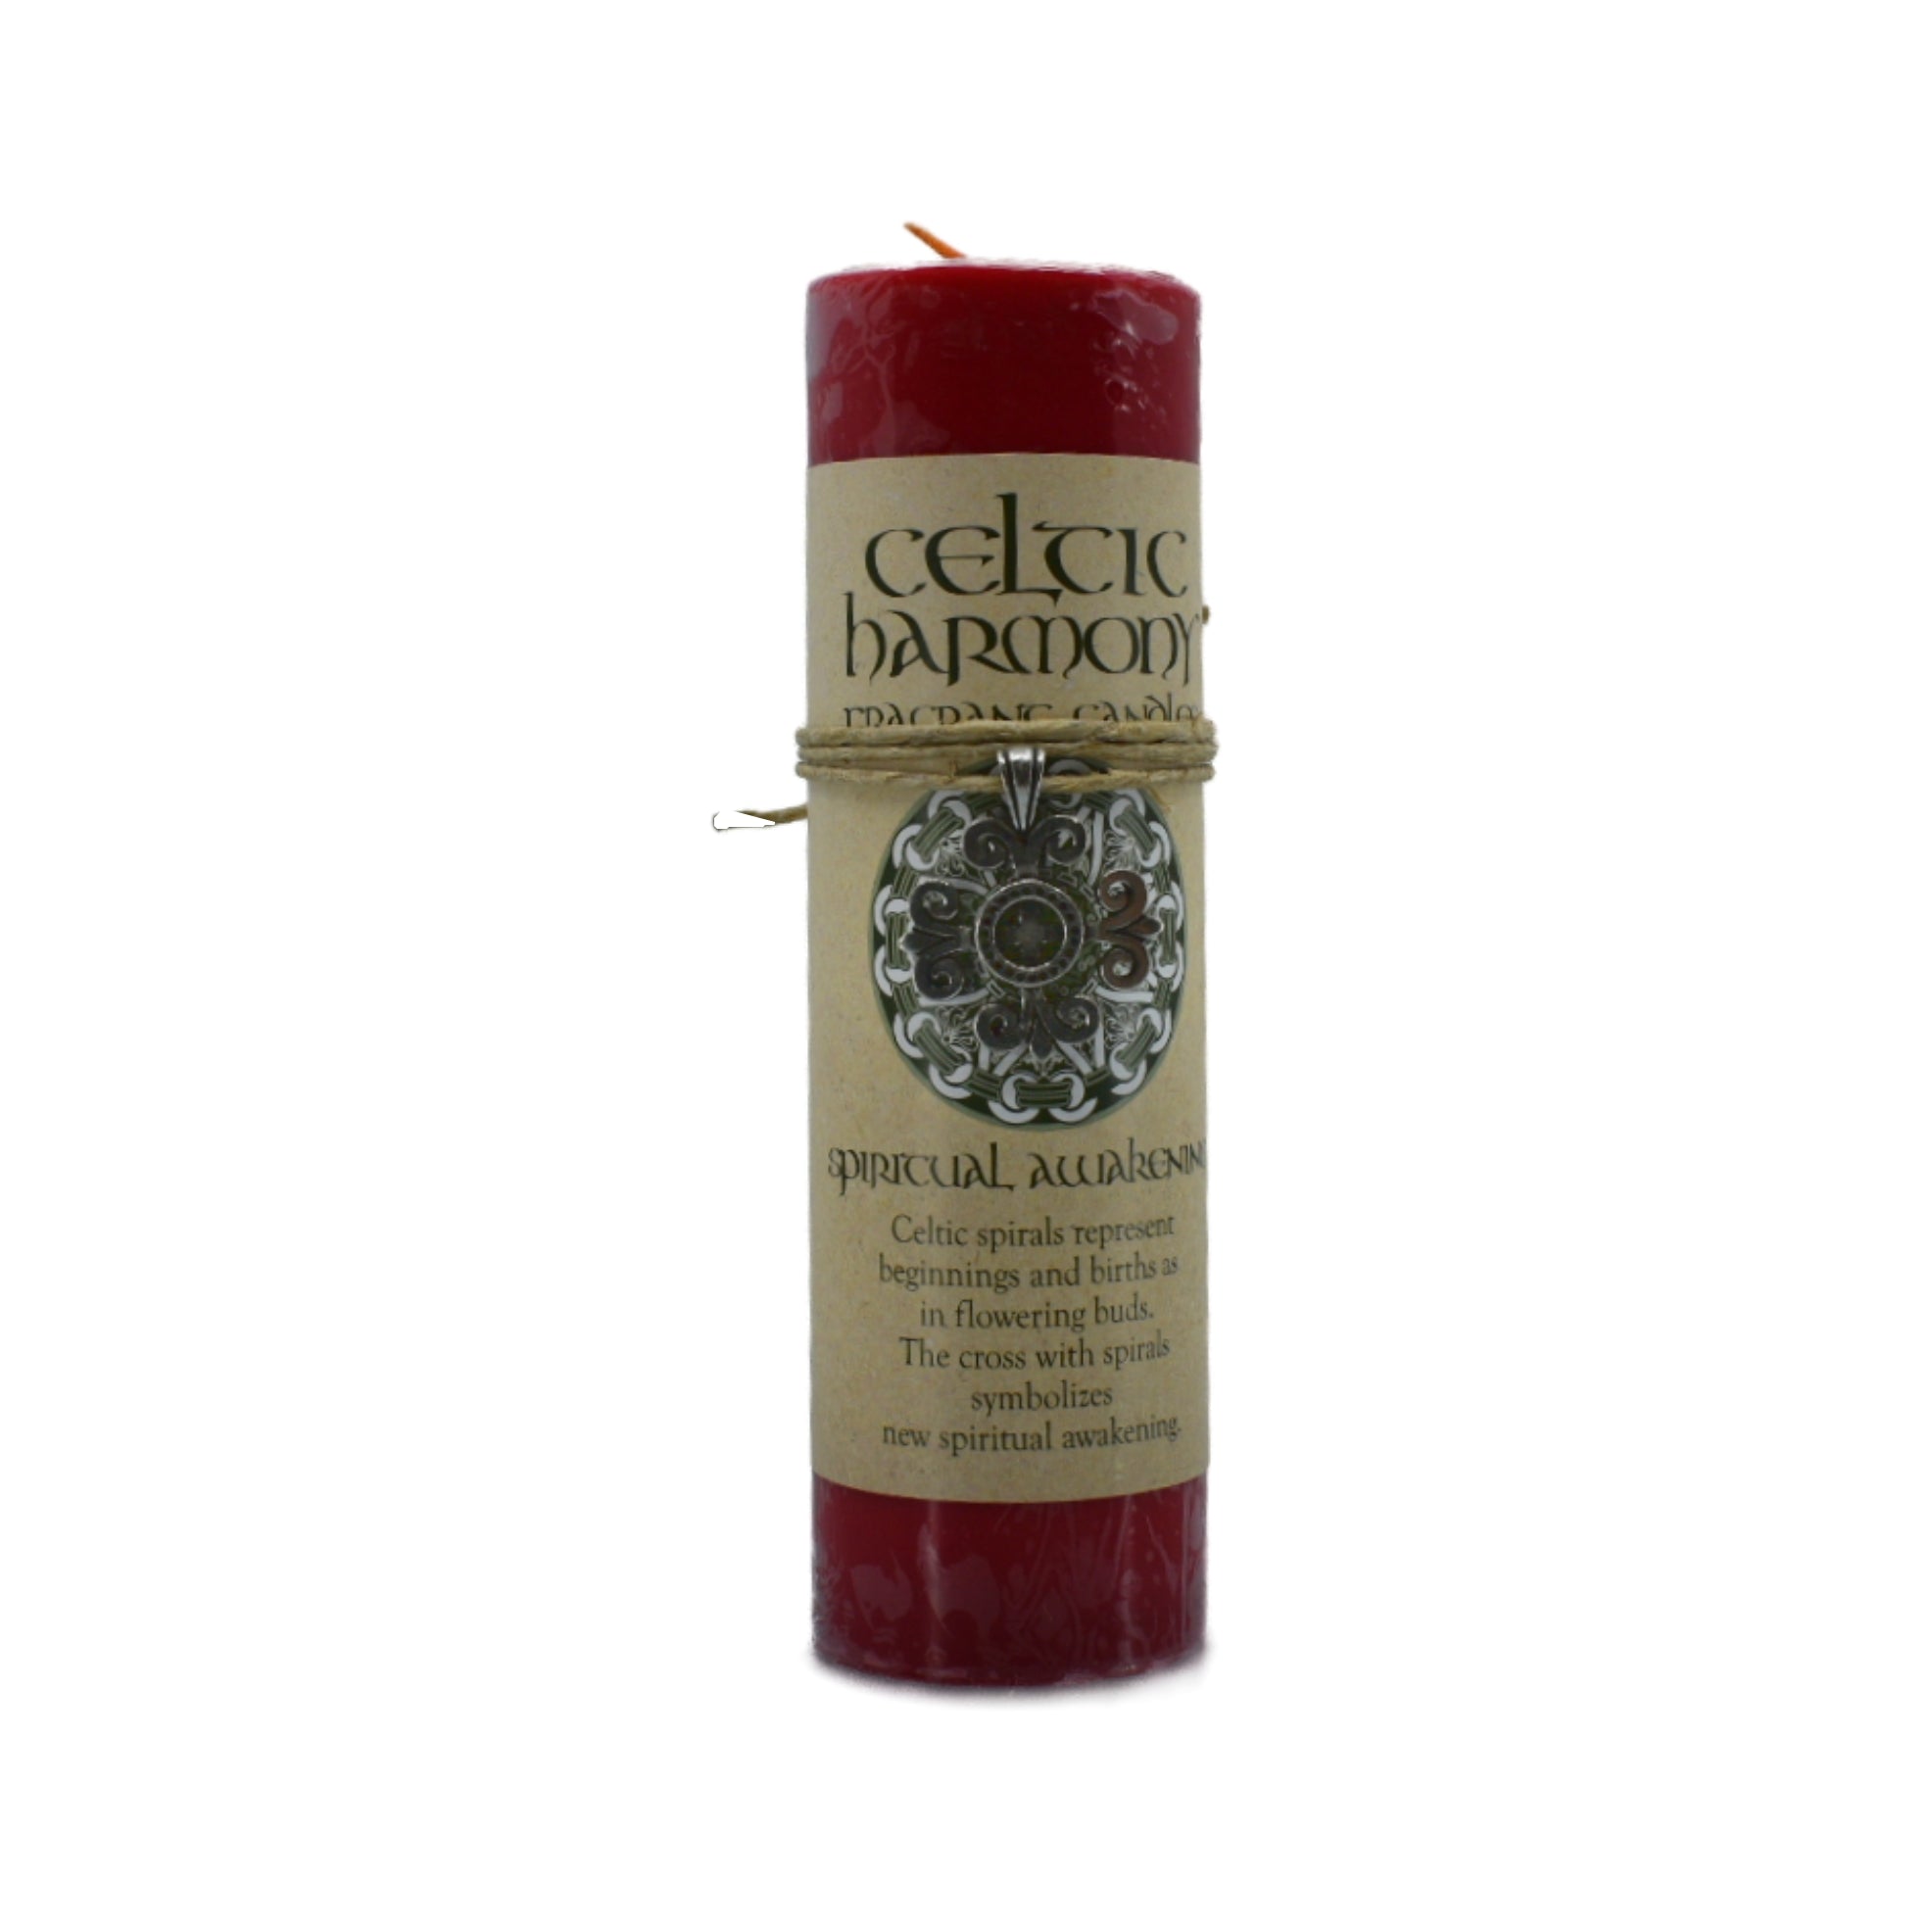 Spiritual Awakening Celtic Pendant Candle.  The pewter pendant can be worn as a necklace or used as an amulet.  The Celtic spirals represent beginnings and birth as in flowering buds.  The cross with spirals symbolizes new spiritual awakening.  Candle is red.